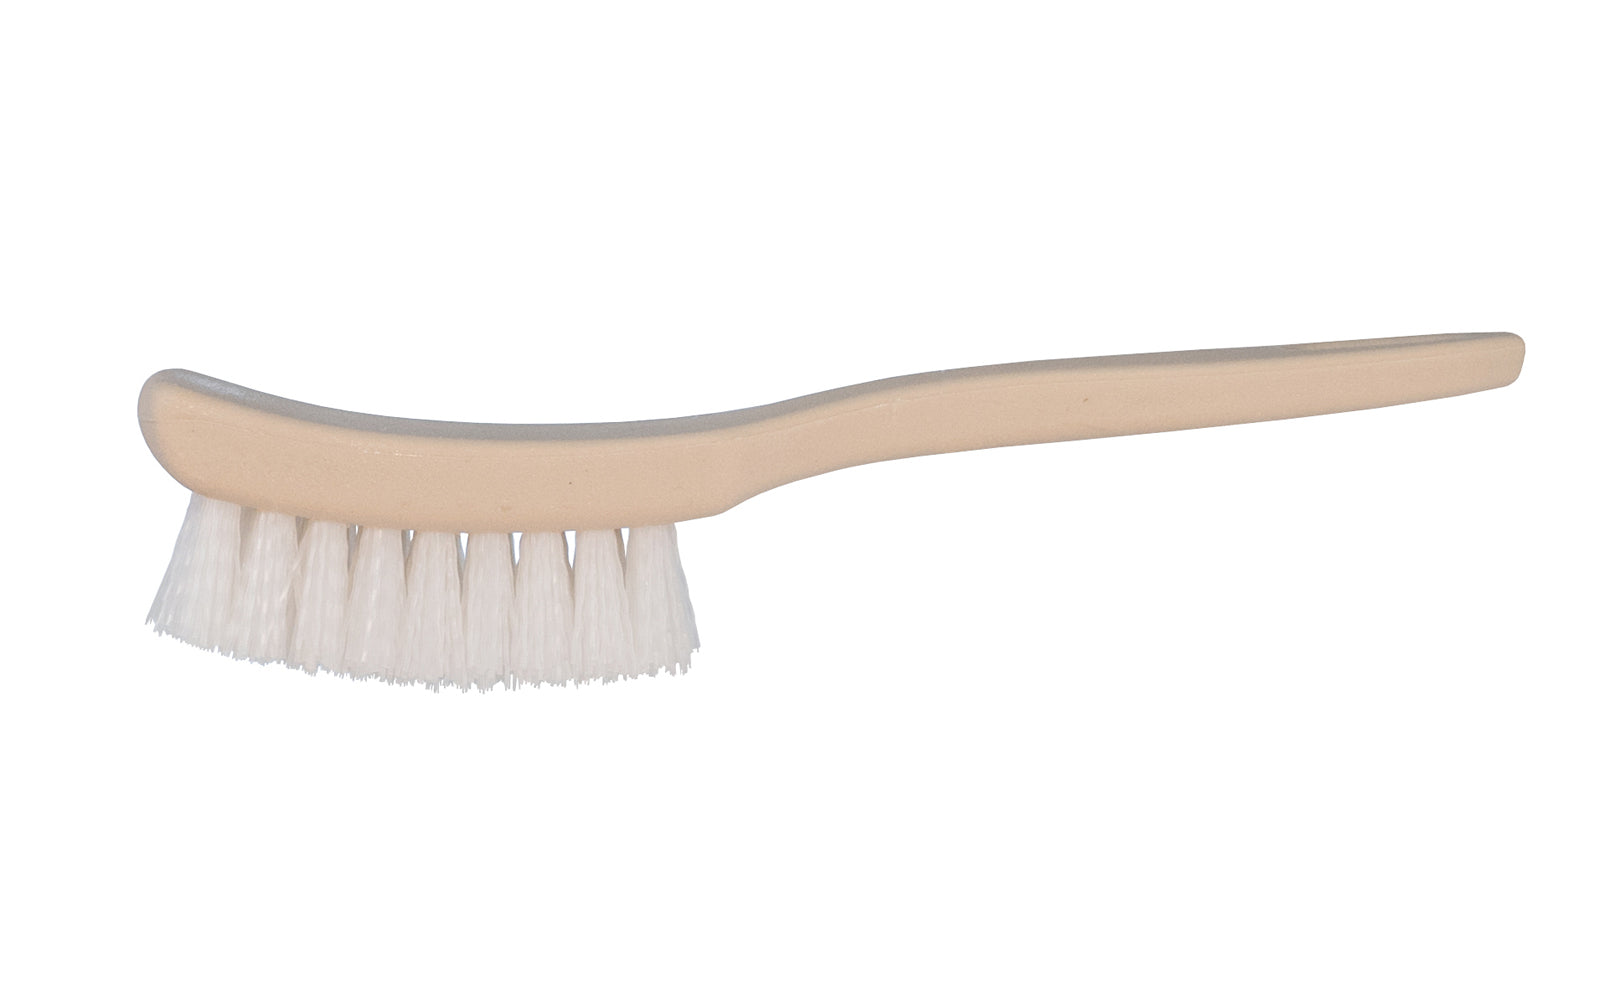 7-1/4" Long Nylon Cleaning Brush with Polypropylene Handle ~ 1-1/4" Width x 13/16" Trim - Magnolia Brush Model No. 66-N - Made in USA